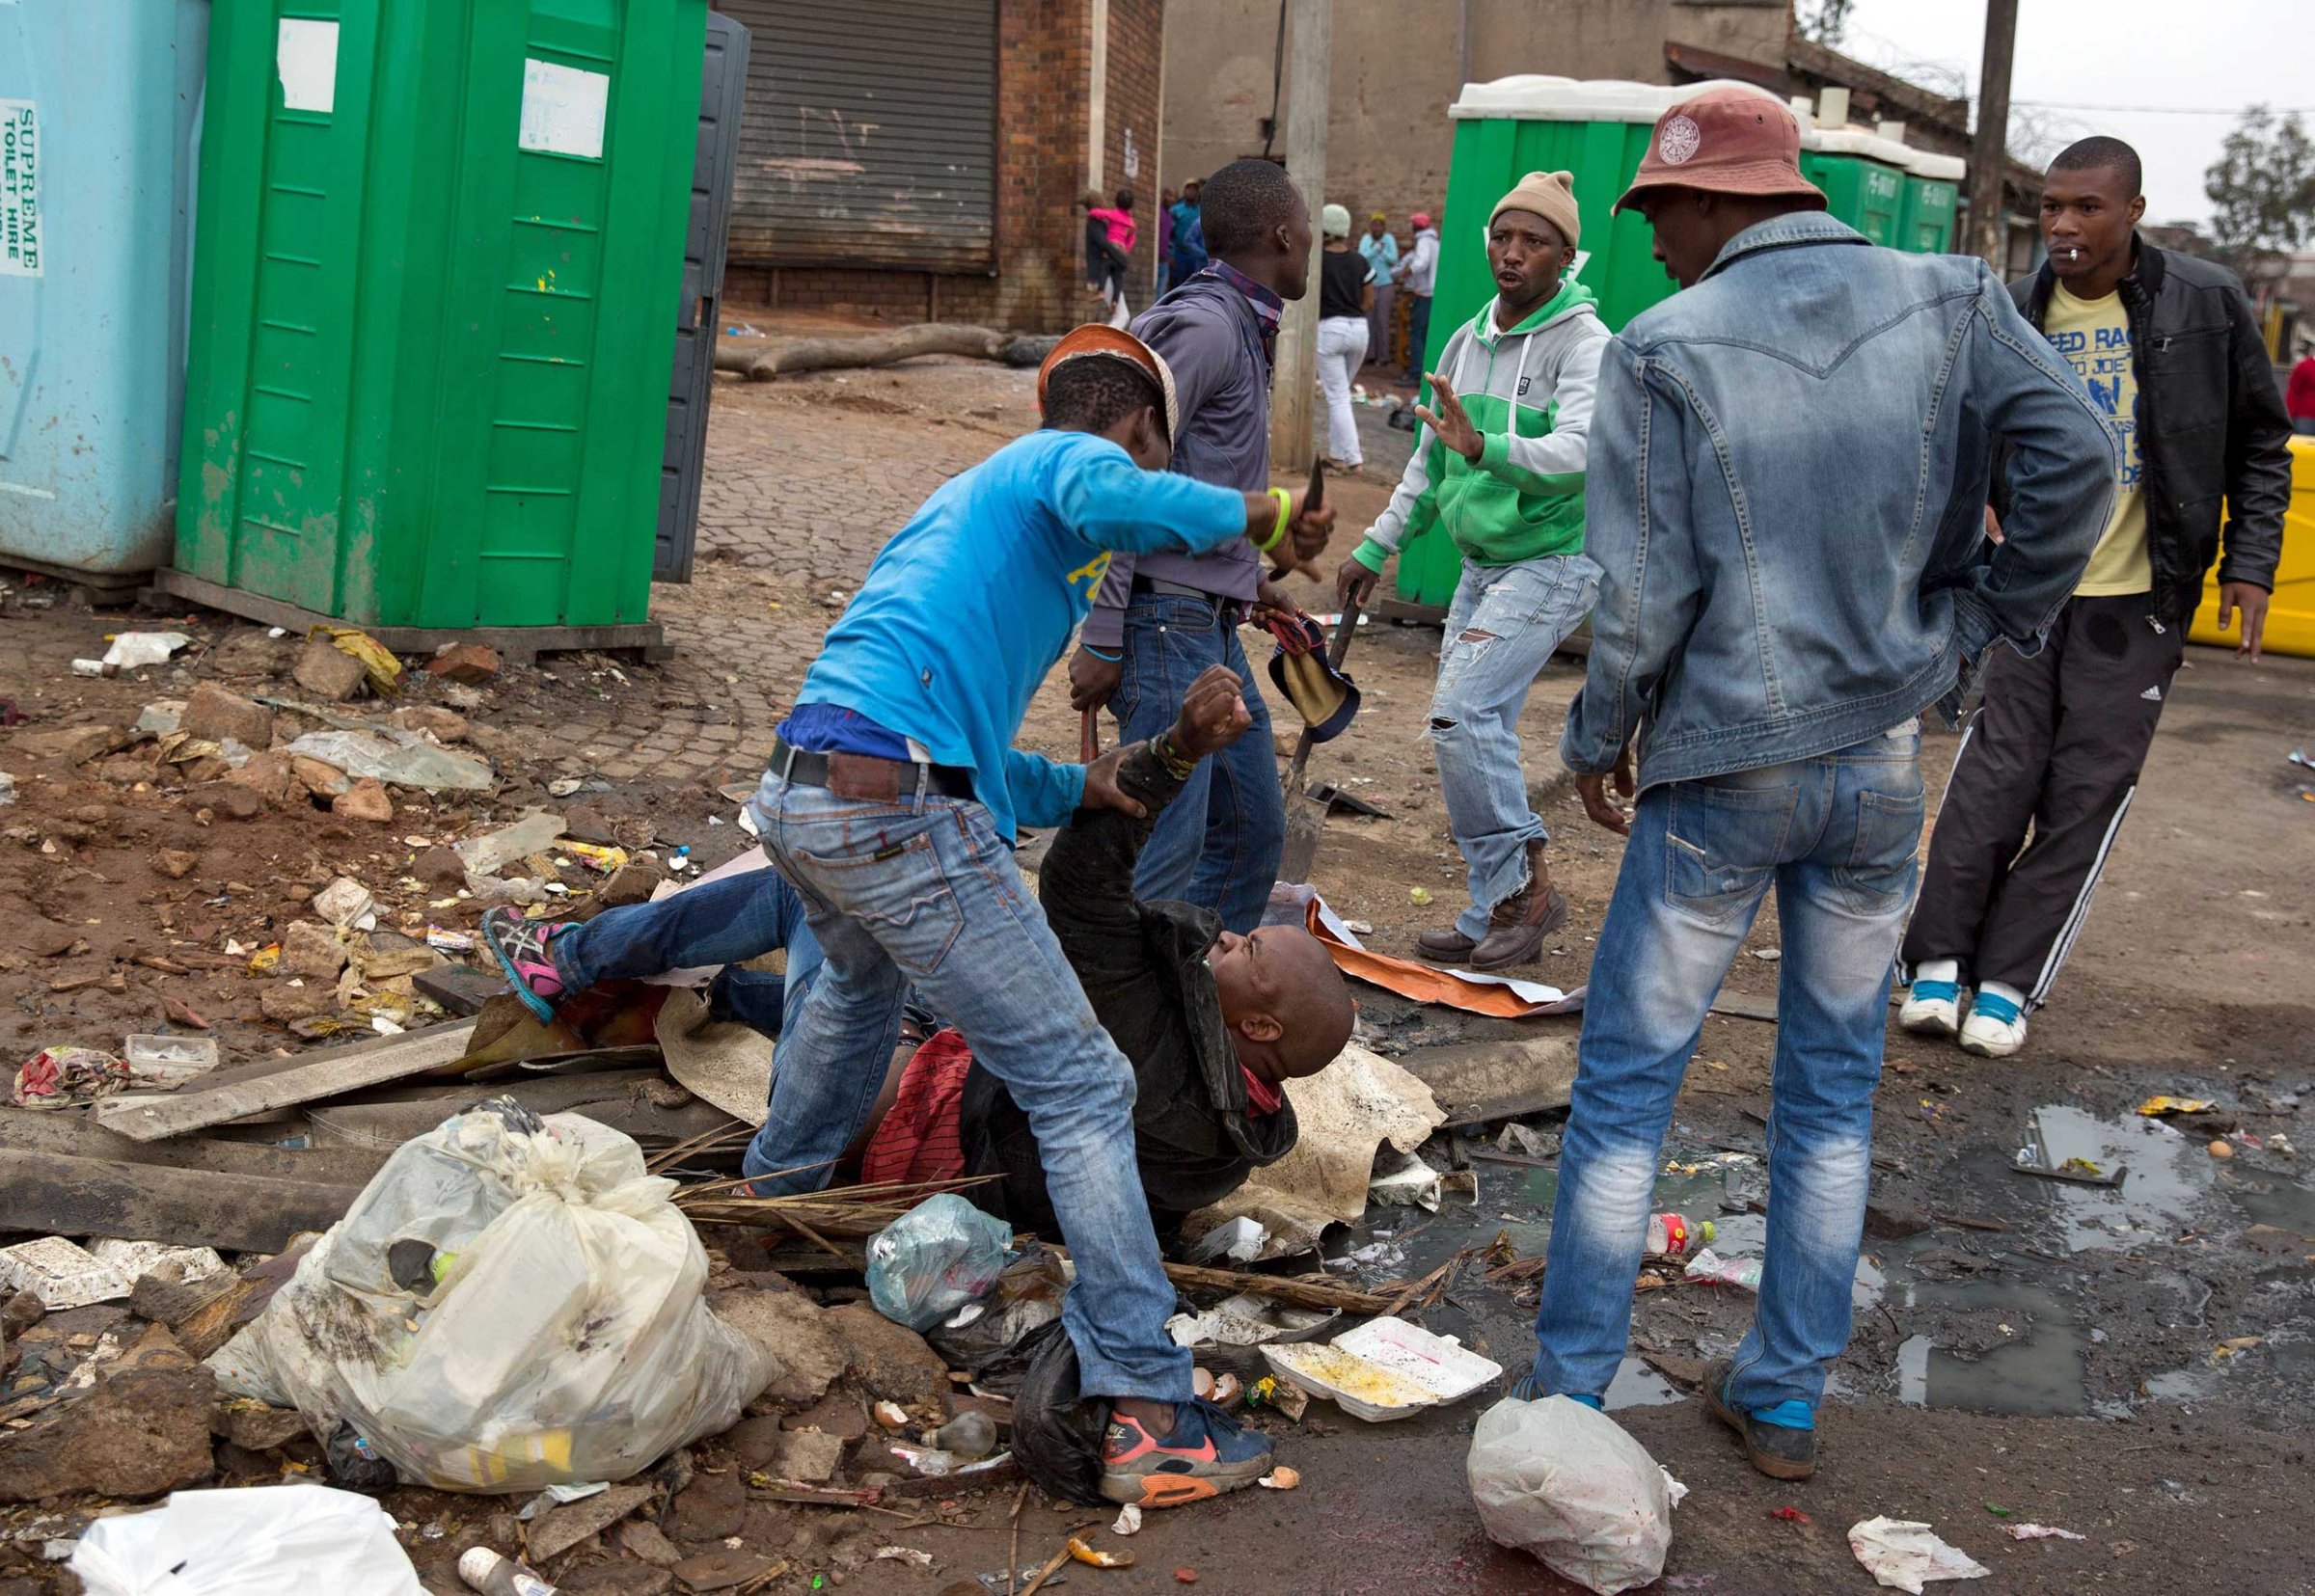 Mozambique national Emmanuel Sithole is attacked by men in Alexandra township during anti-immigrant violence in Johannesburg on April 18, 2015.